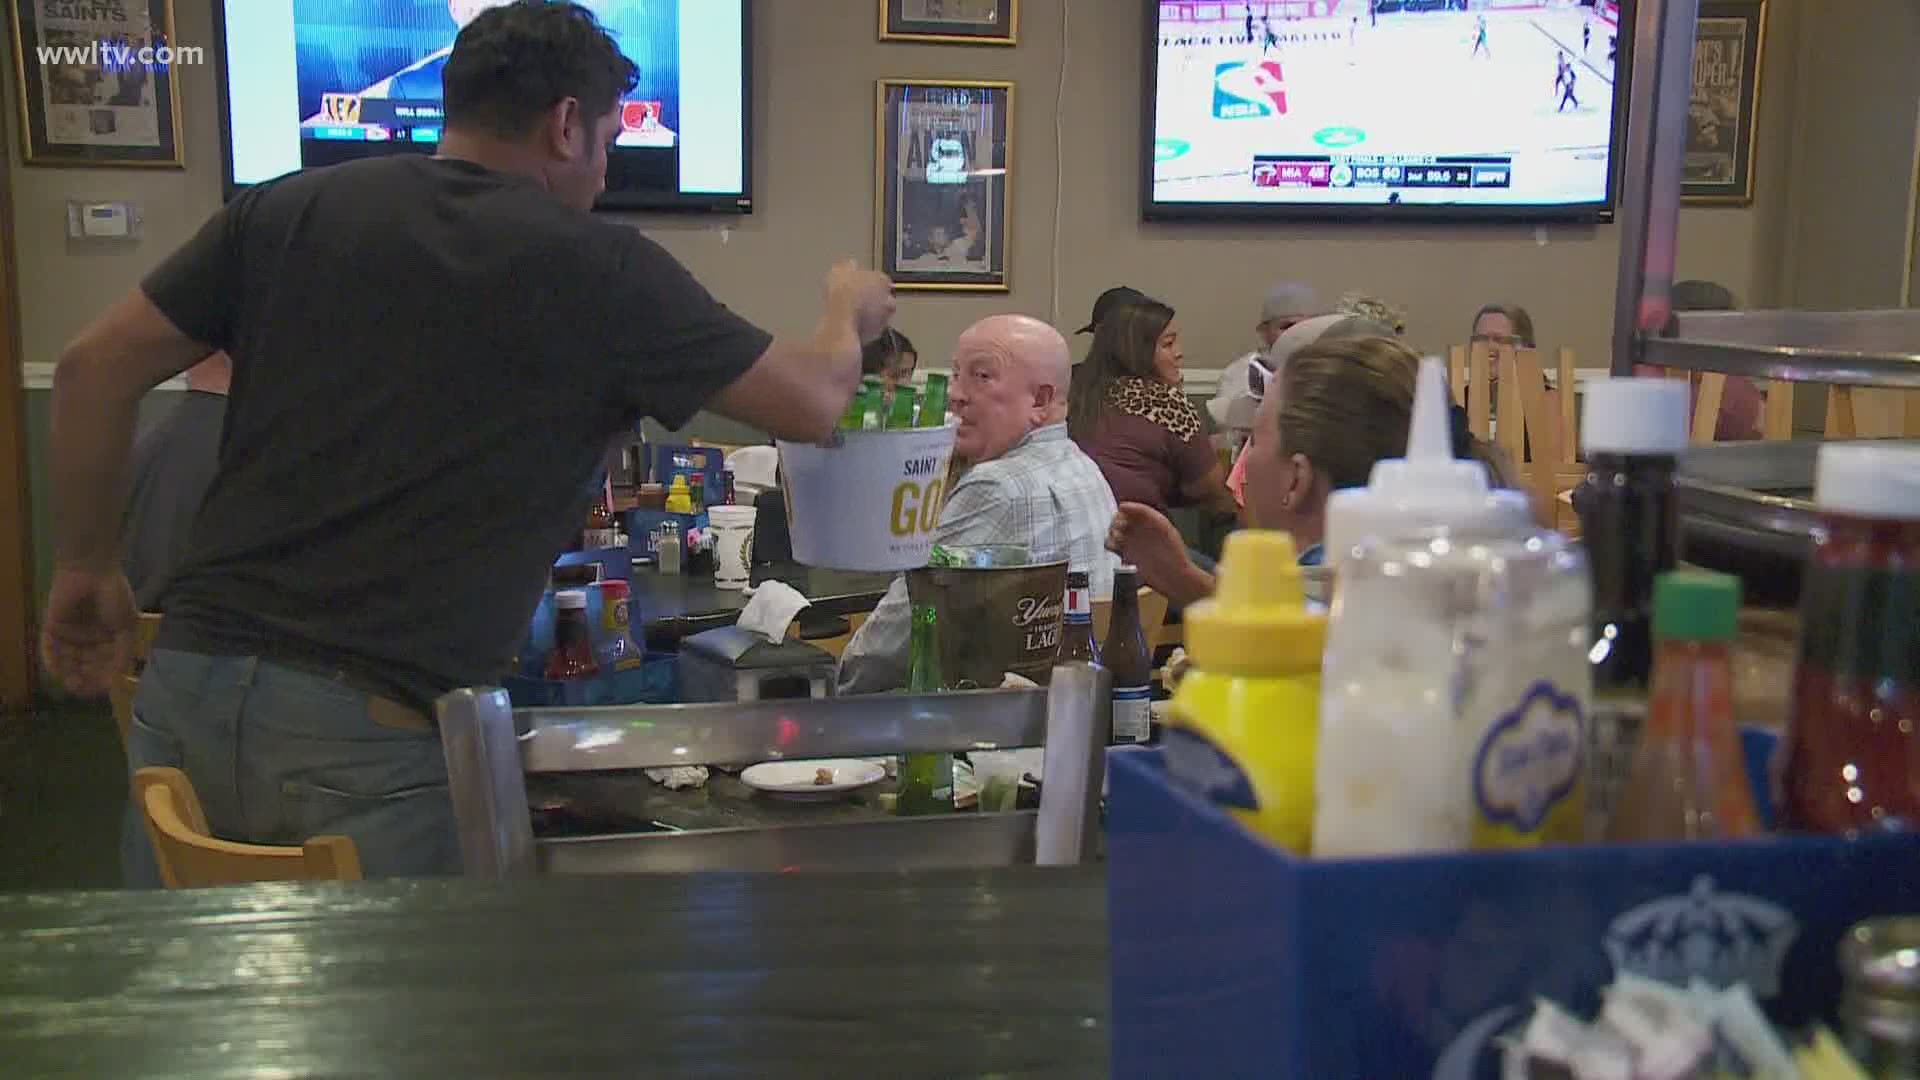 Rules were changed Thursday to allow bars to serve alcohol until 11 p.m.